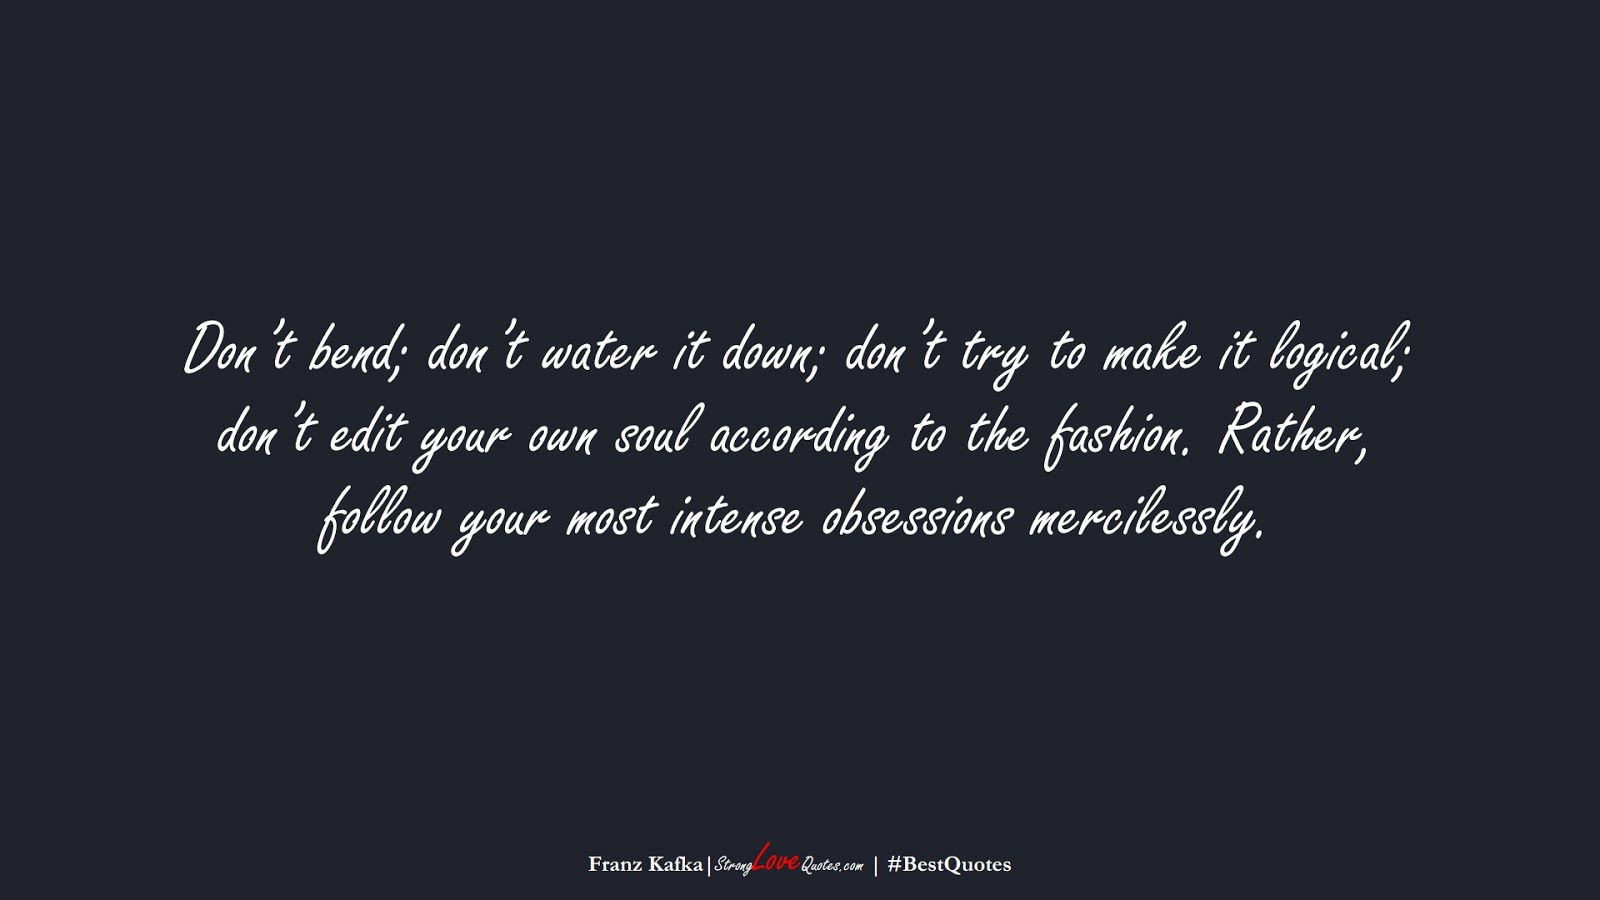 Don’t bend; don’t water it down; don’t try to make it logical; don’t edit your own soul according to the fashion. Rather, follow your most intense obsessions mercilessly. (Franz Kafka);  #BestQuotes